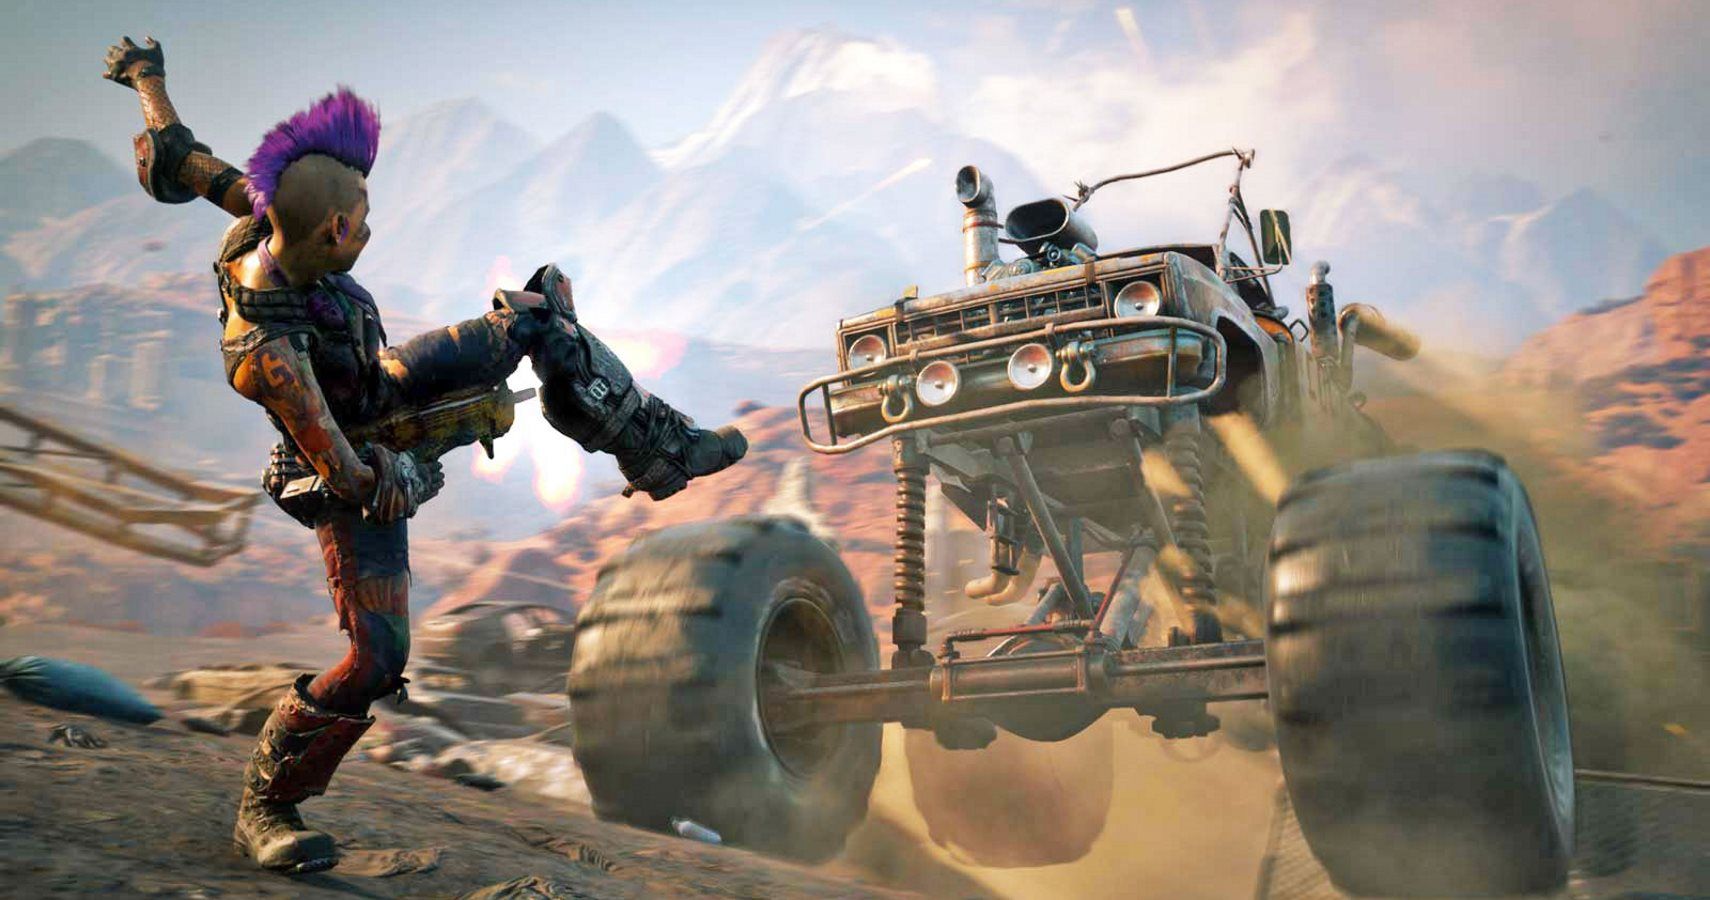 Rage 2 Developers Say It Will Not Have Loading Screens